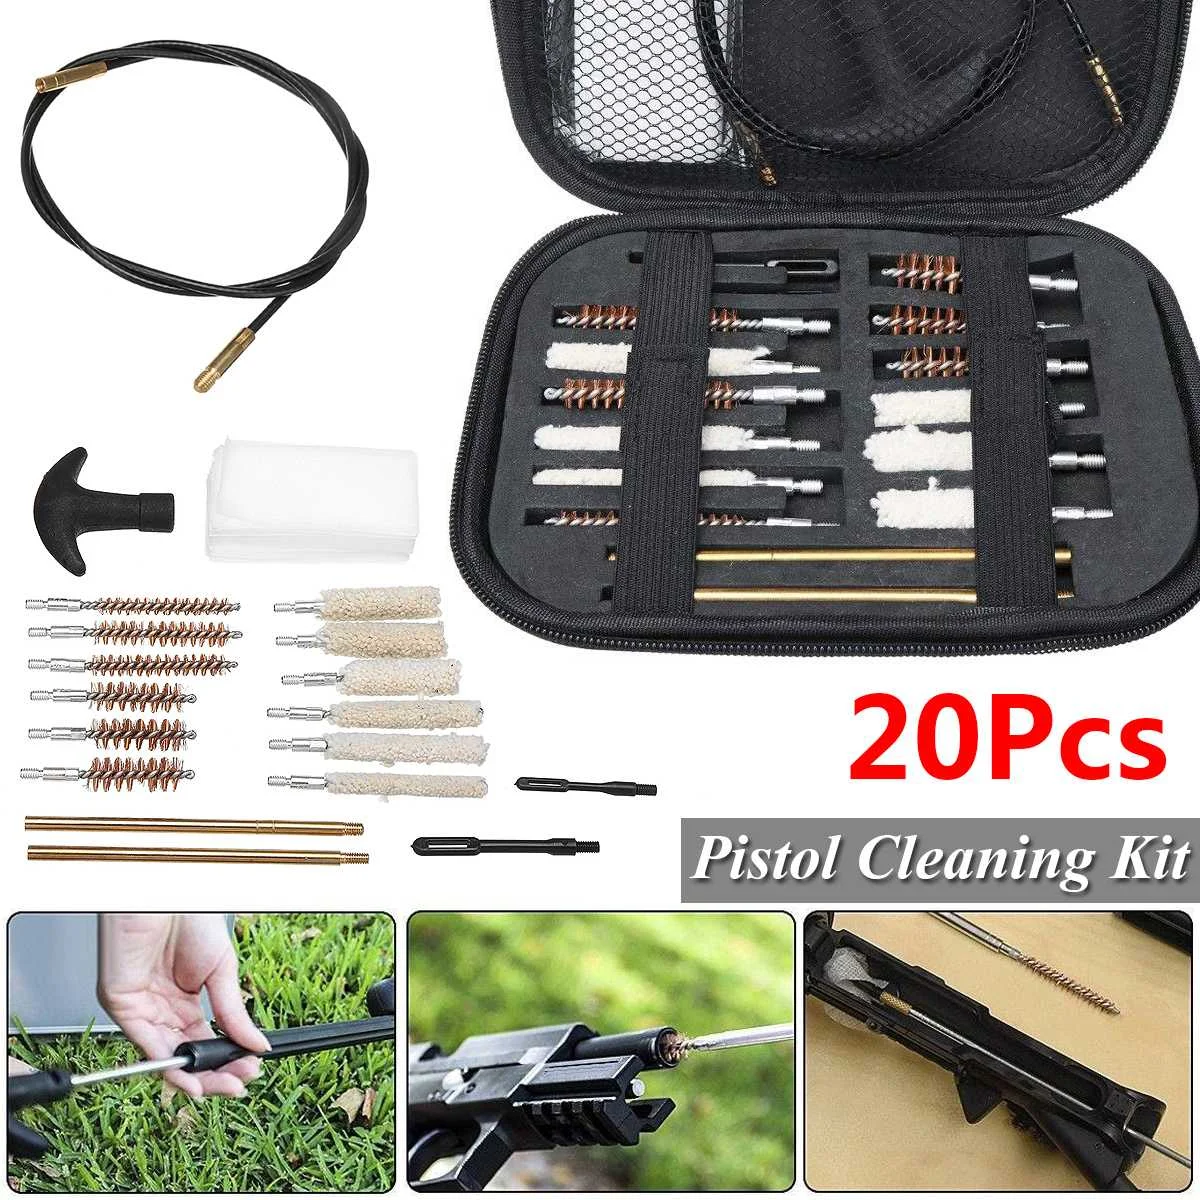 

20pcs/Set Pistol Cleaning Kit Portable Rifle Brushes for Size 22 357 38 40 44 45 9mm Outdoor Clean Tool with Carrying Case